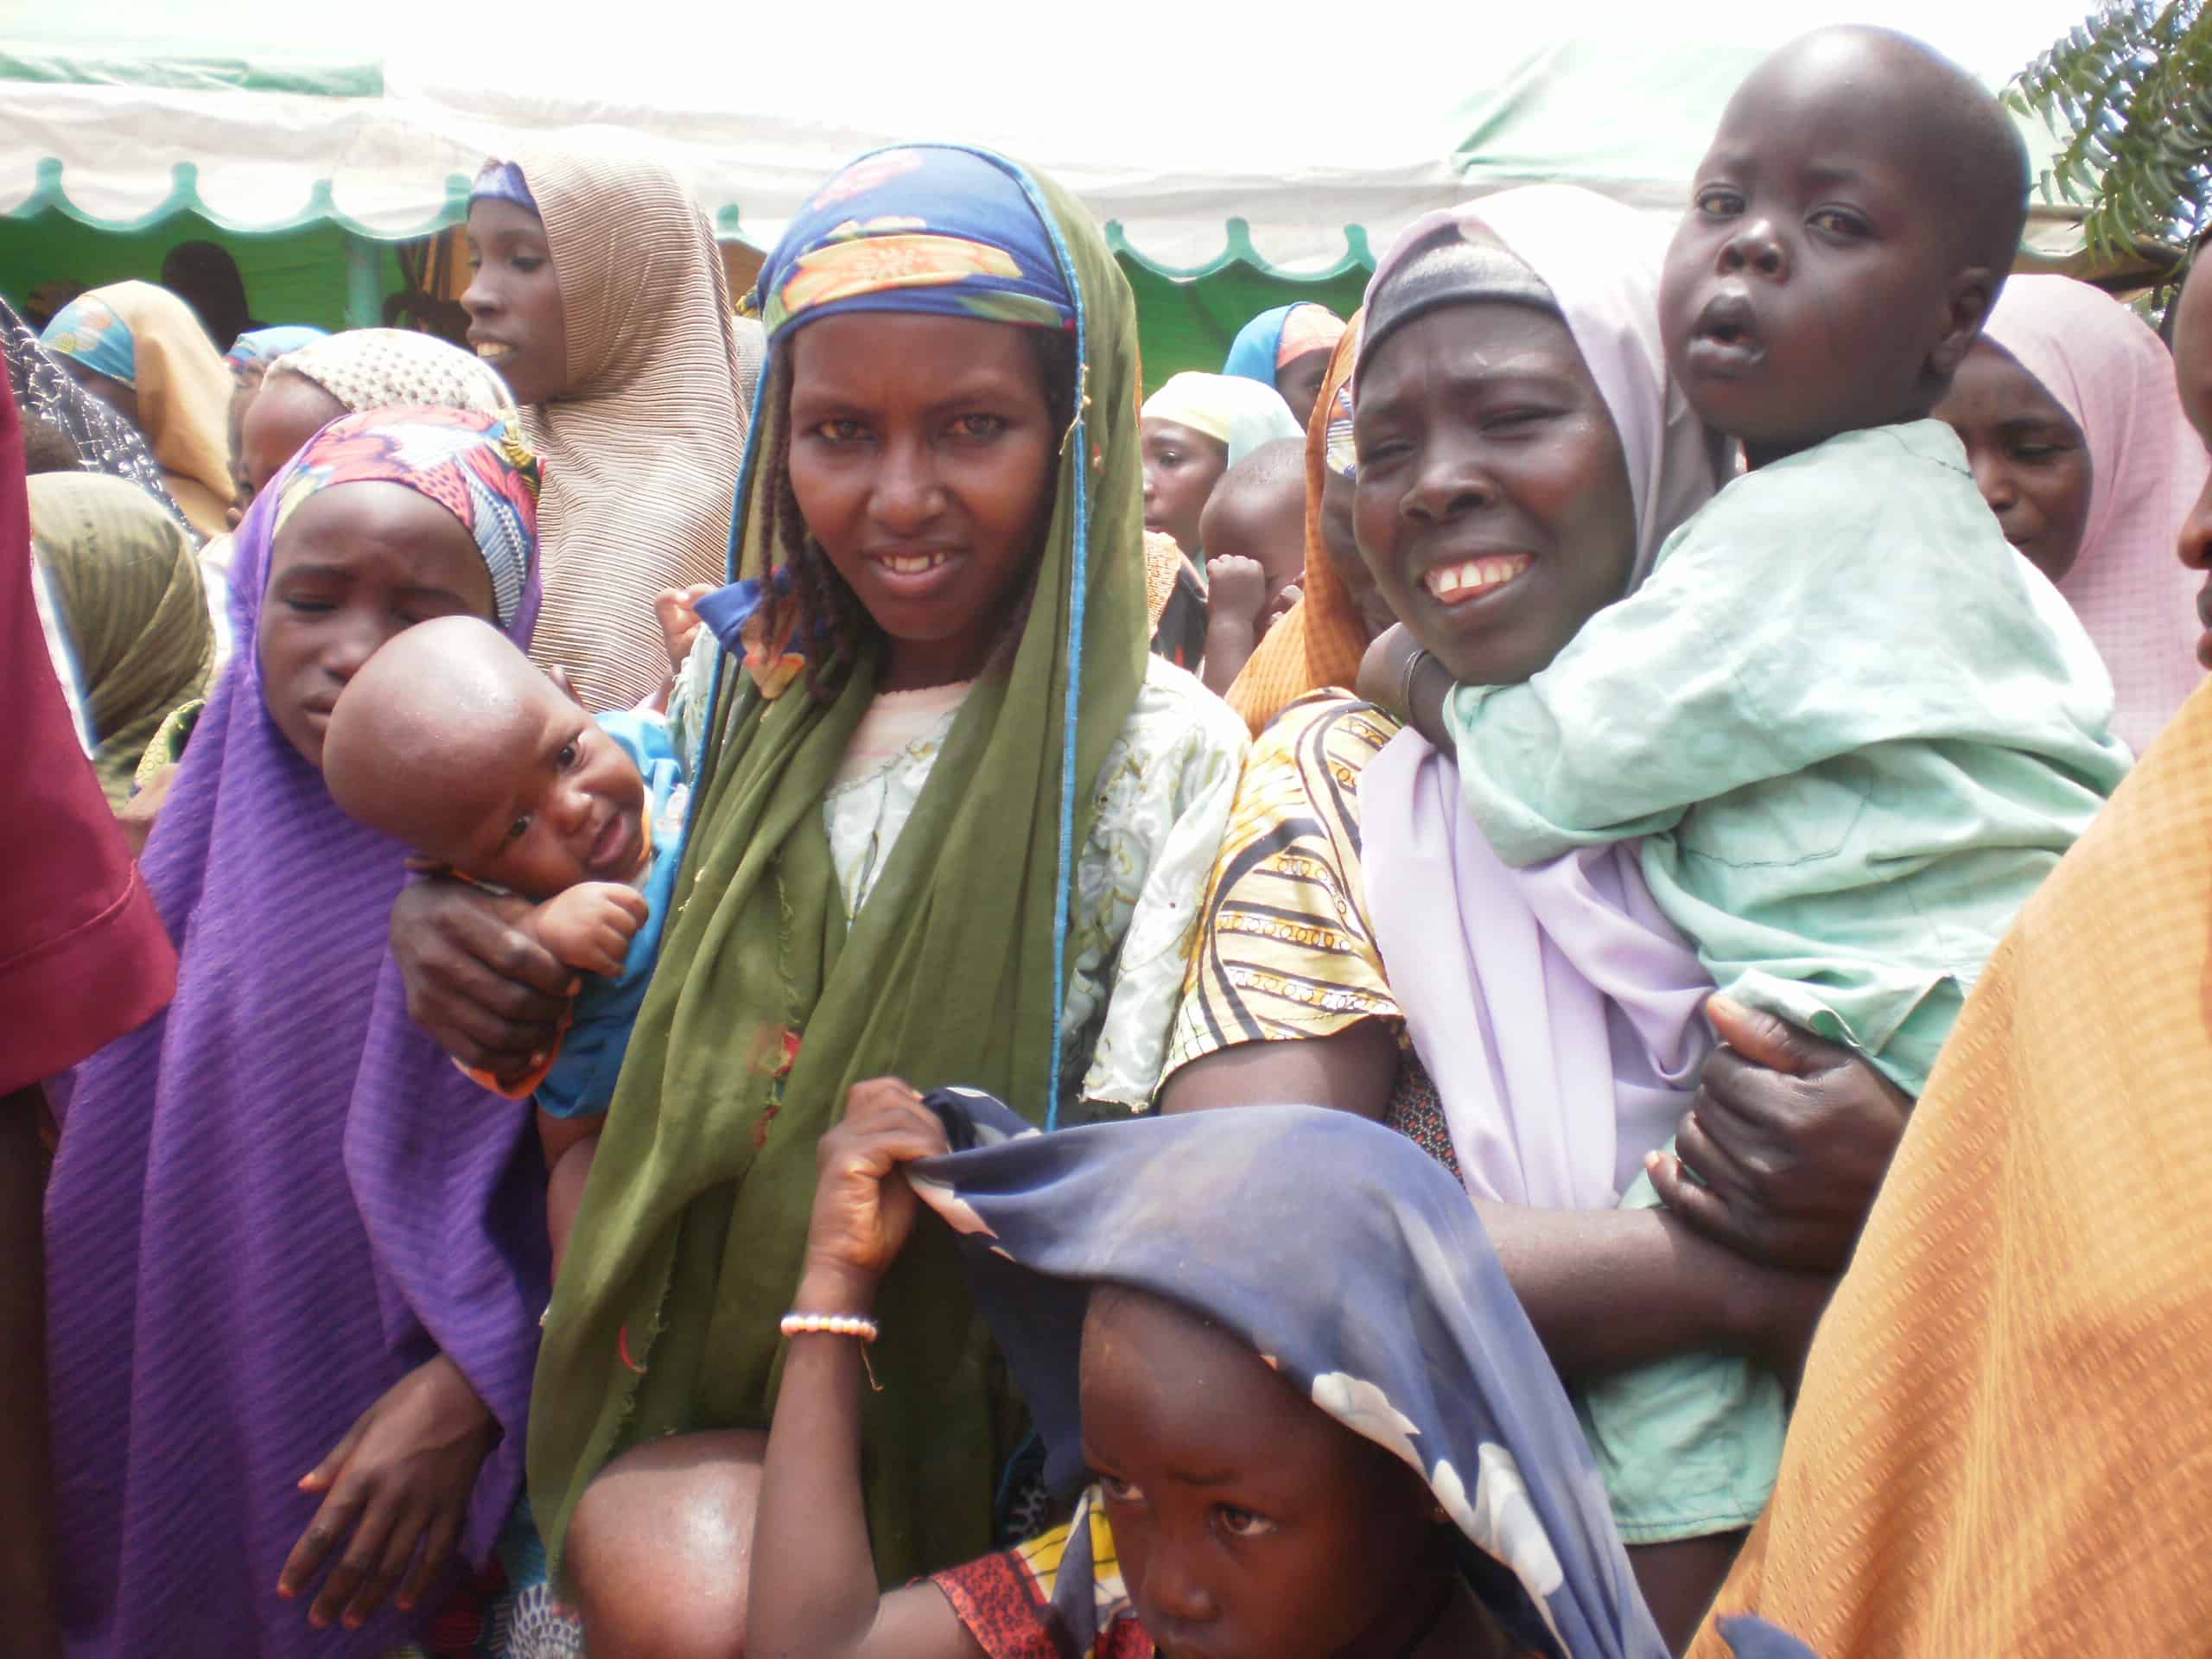 Nigerian mothers hold their children while attending an event held by JSI's Targeted States High Impact Project in Nigeria